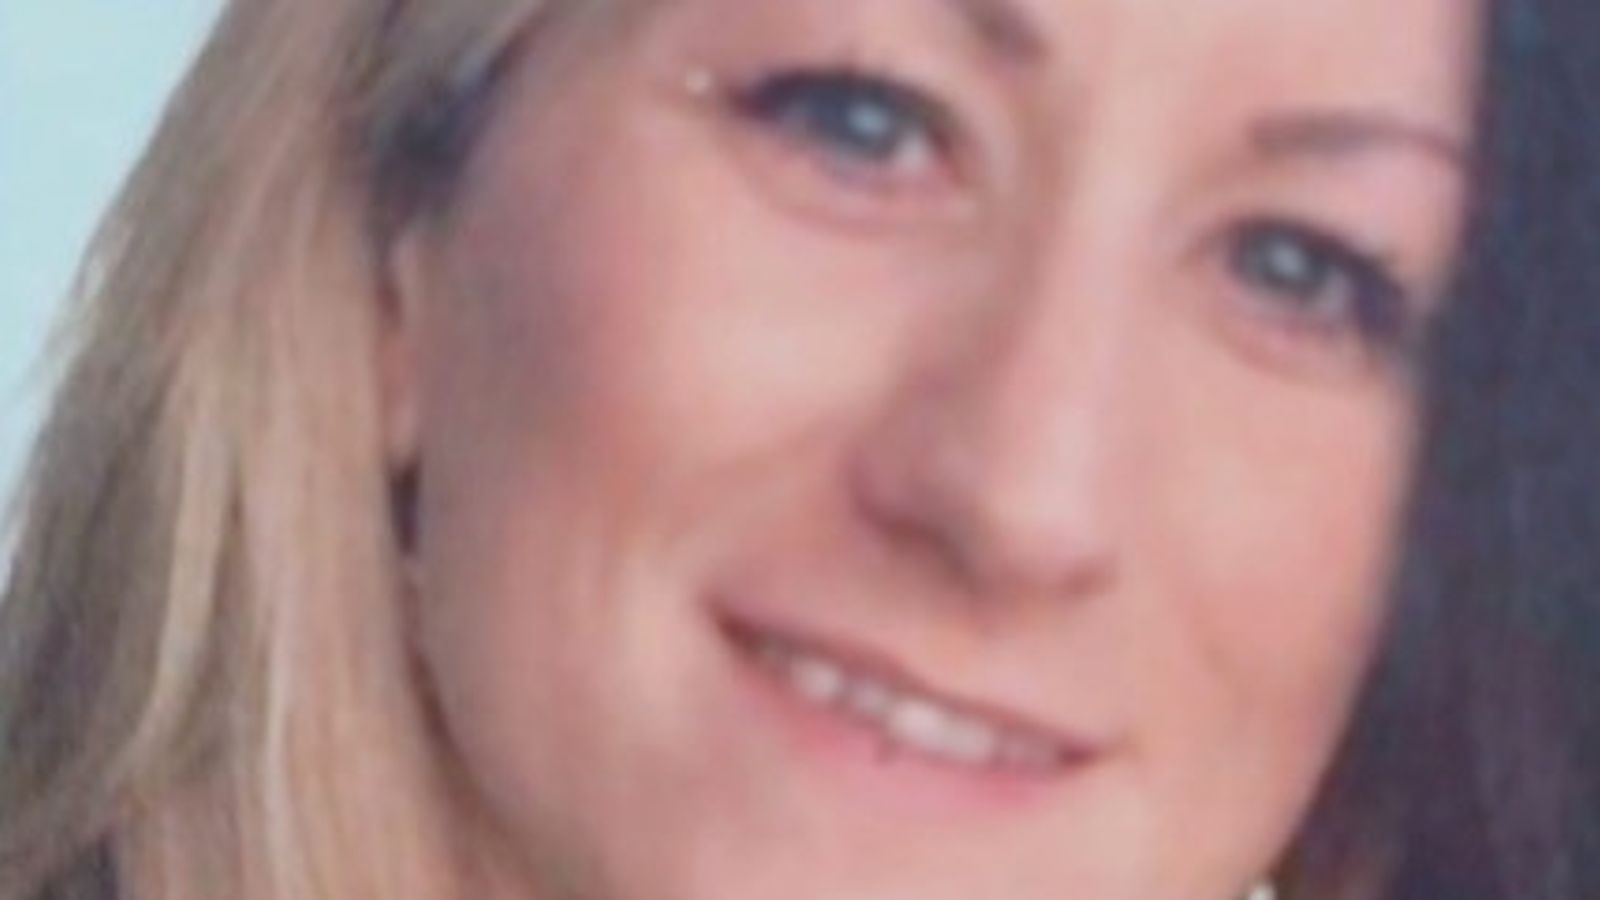 Sarah Mayhew: Victim formally identified after human remains found in south London park